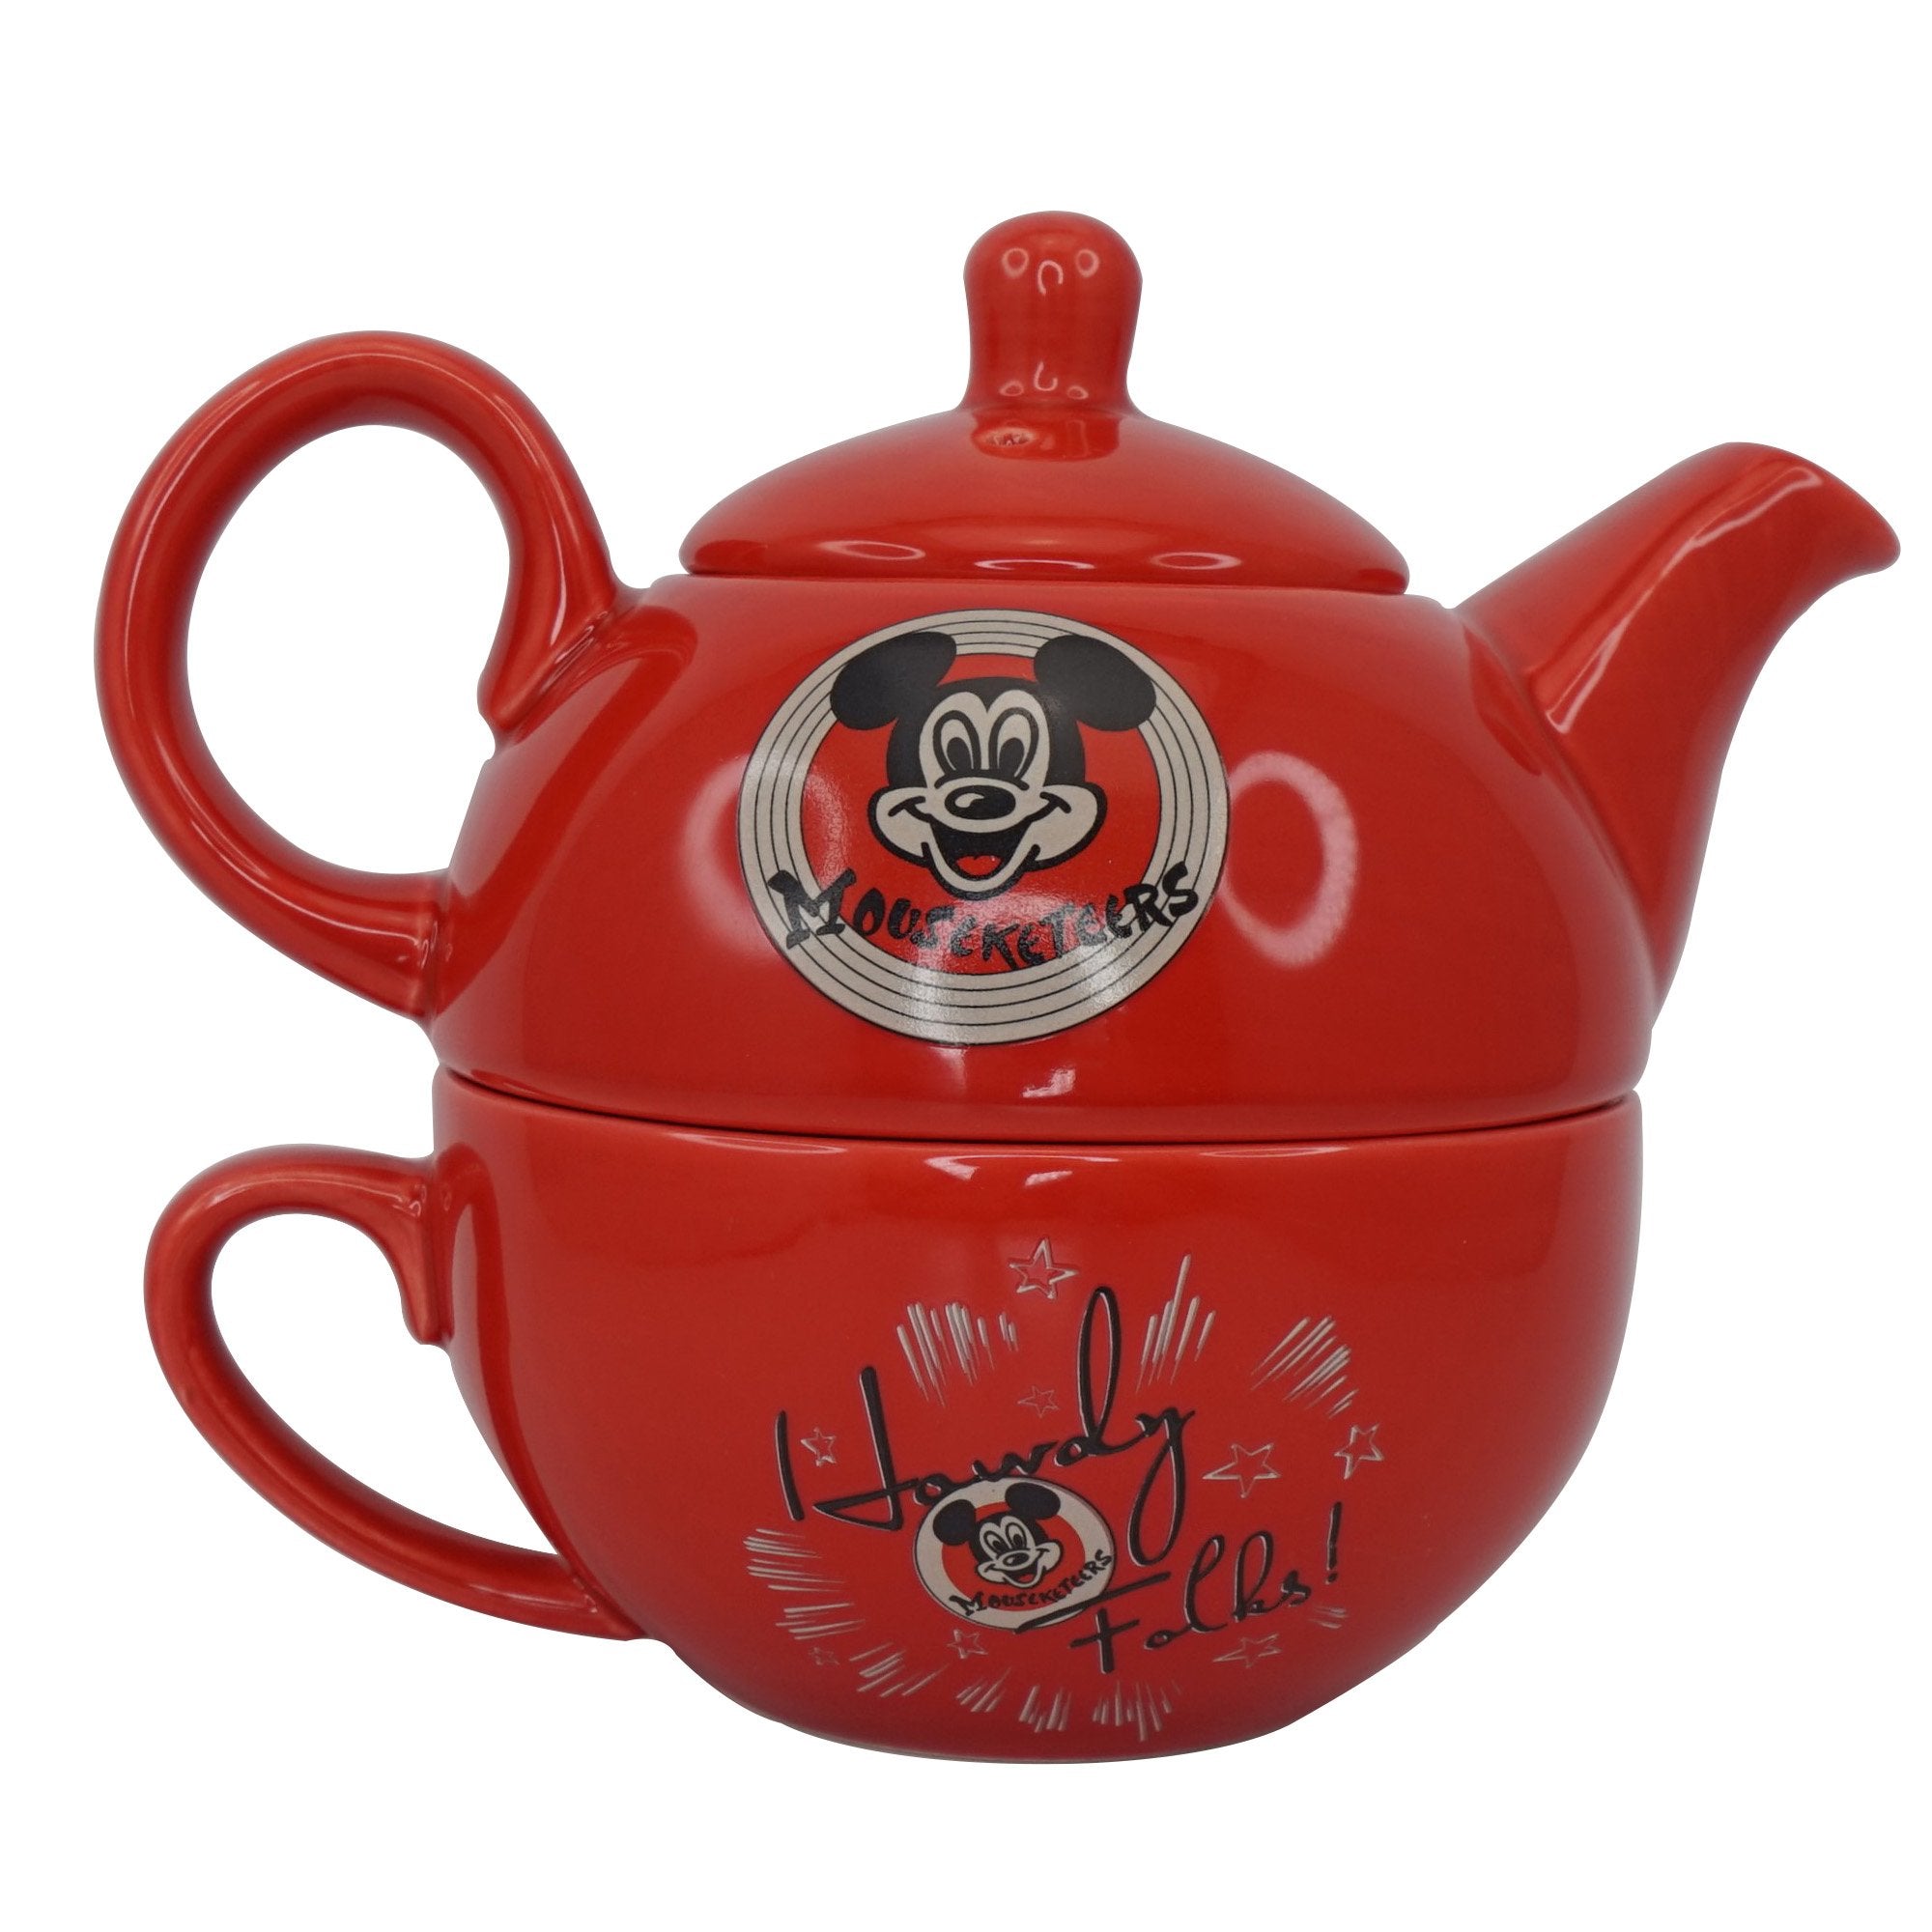 Tea For One Boxed - Disney Mickey Mouse (Mickey Mouse Club)